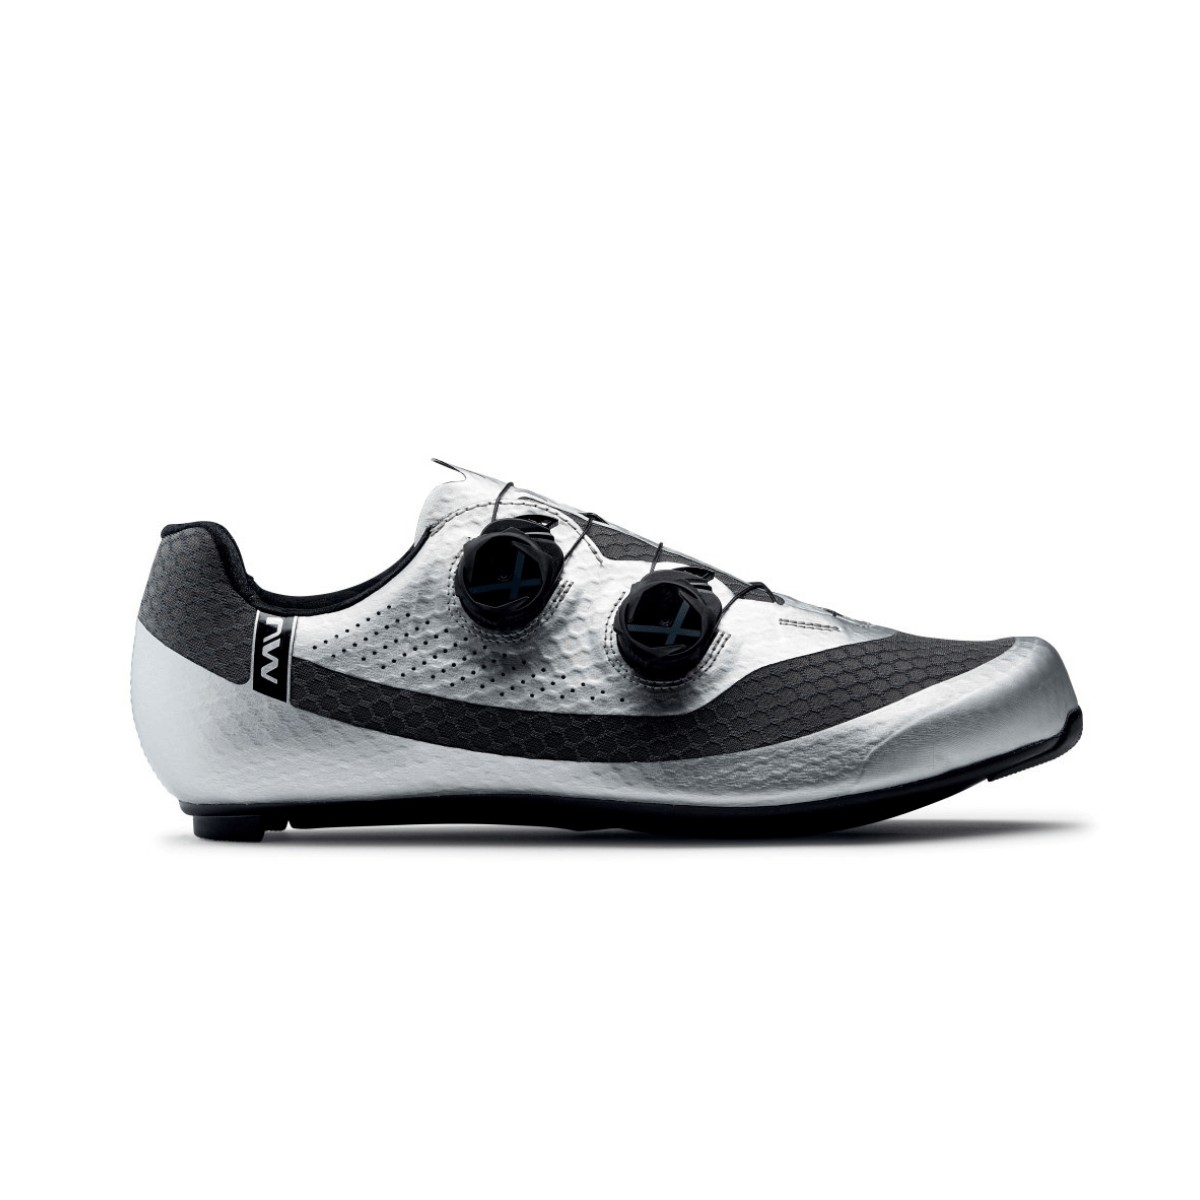 Chaussures Northwave Mistral Plus Argent, Taille 42 - EUR